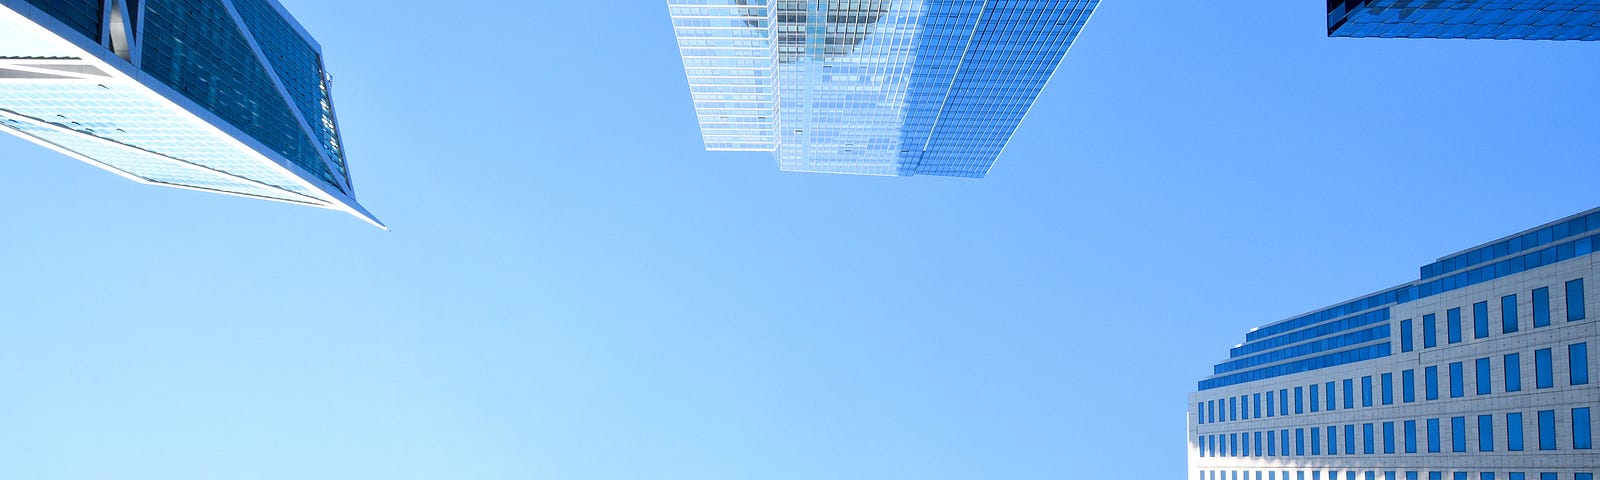 Photo of bright blue and cloudless sky with glass and concrete high-rise buildings framing the edges